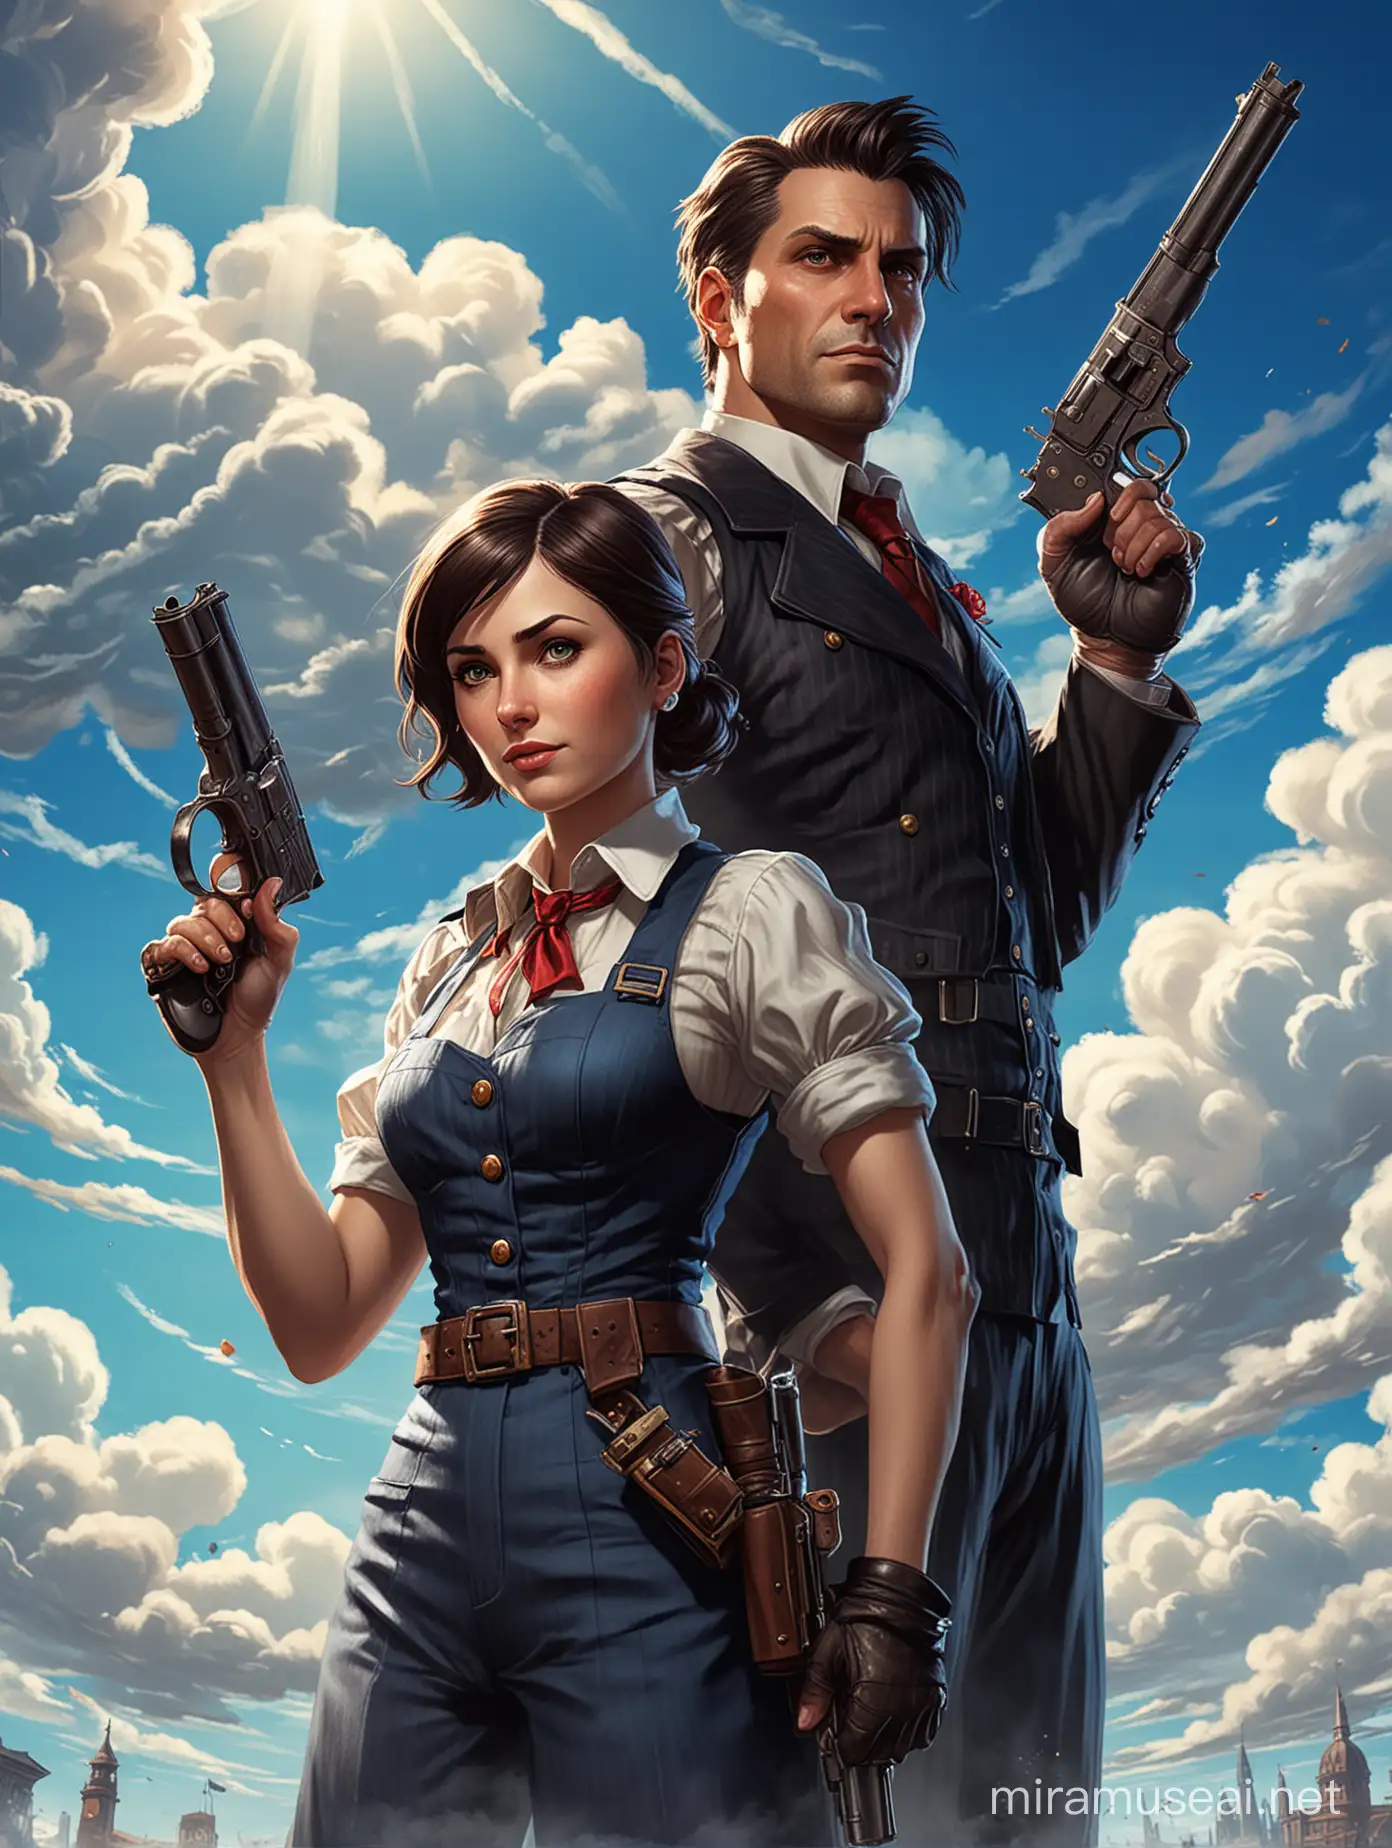 Booker dewitt from bioshock infinite and anni starlight from the boys holding a pistol clouds blue sky background columbia